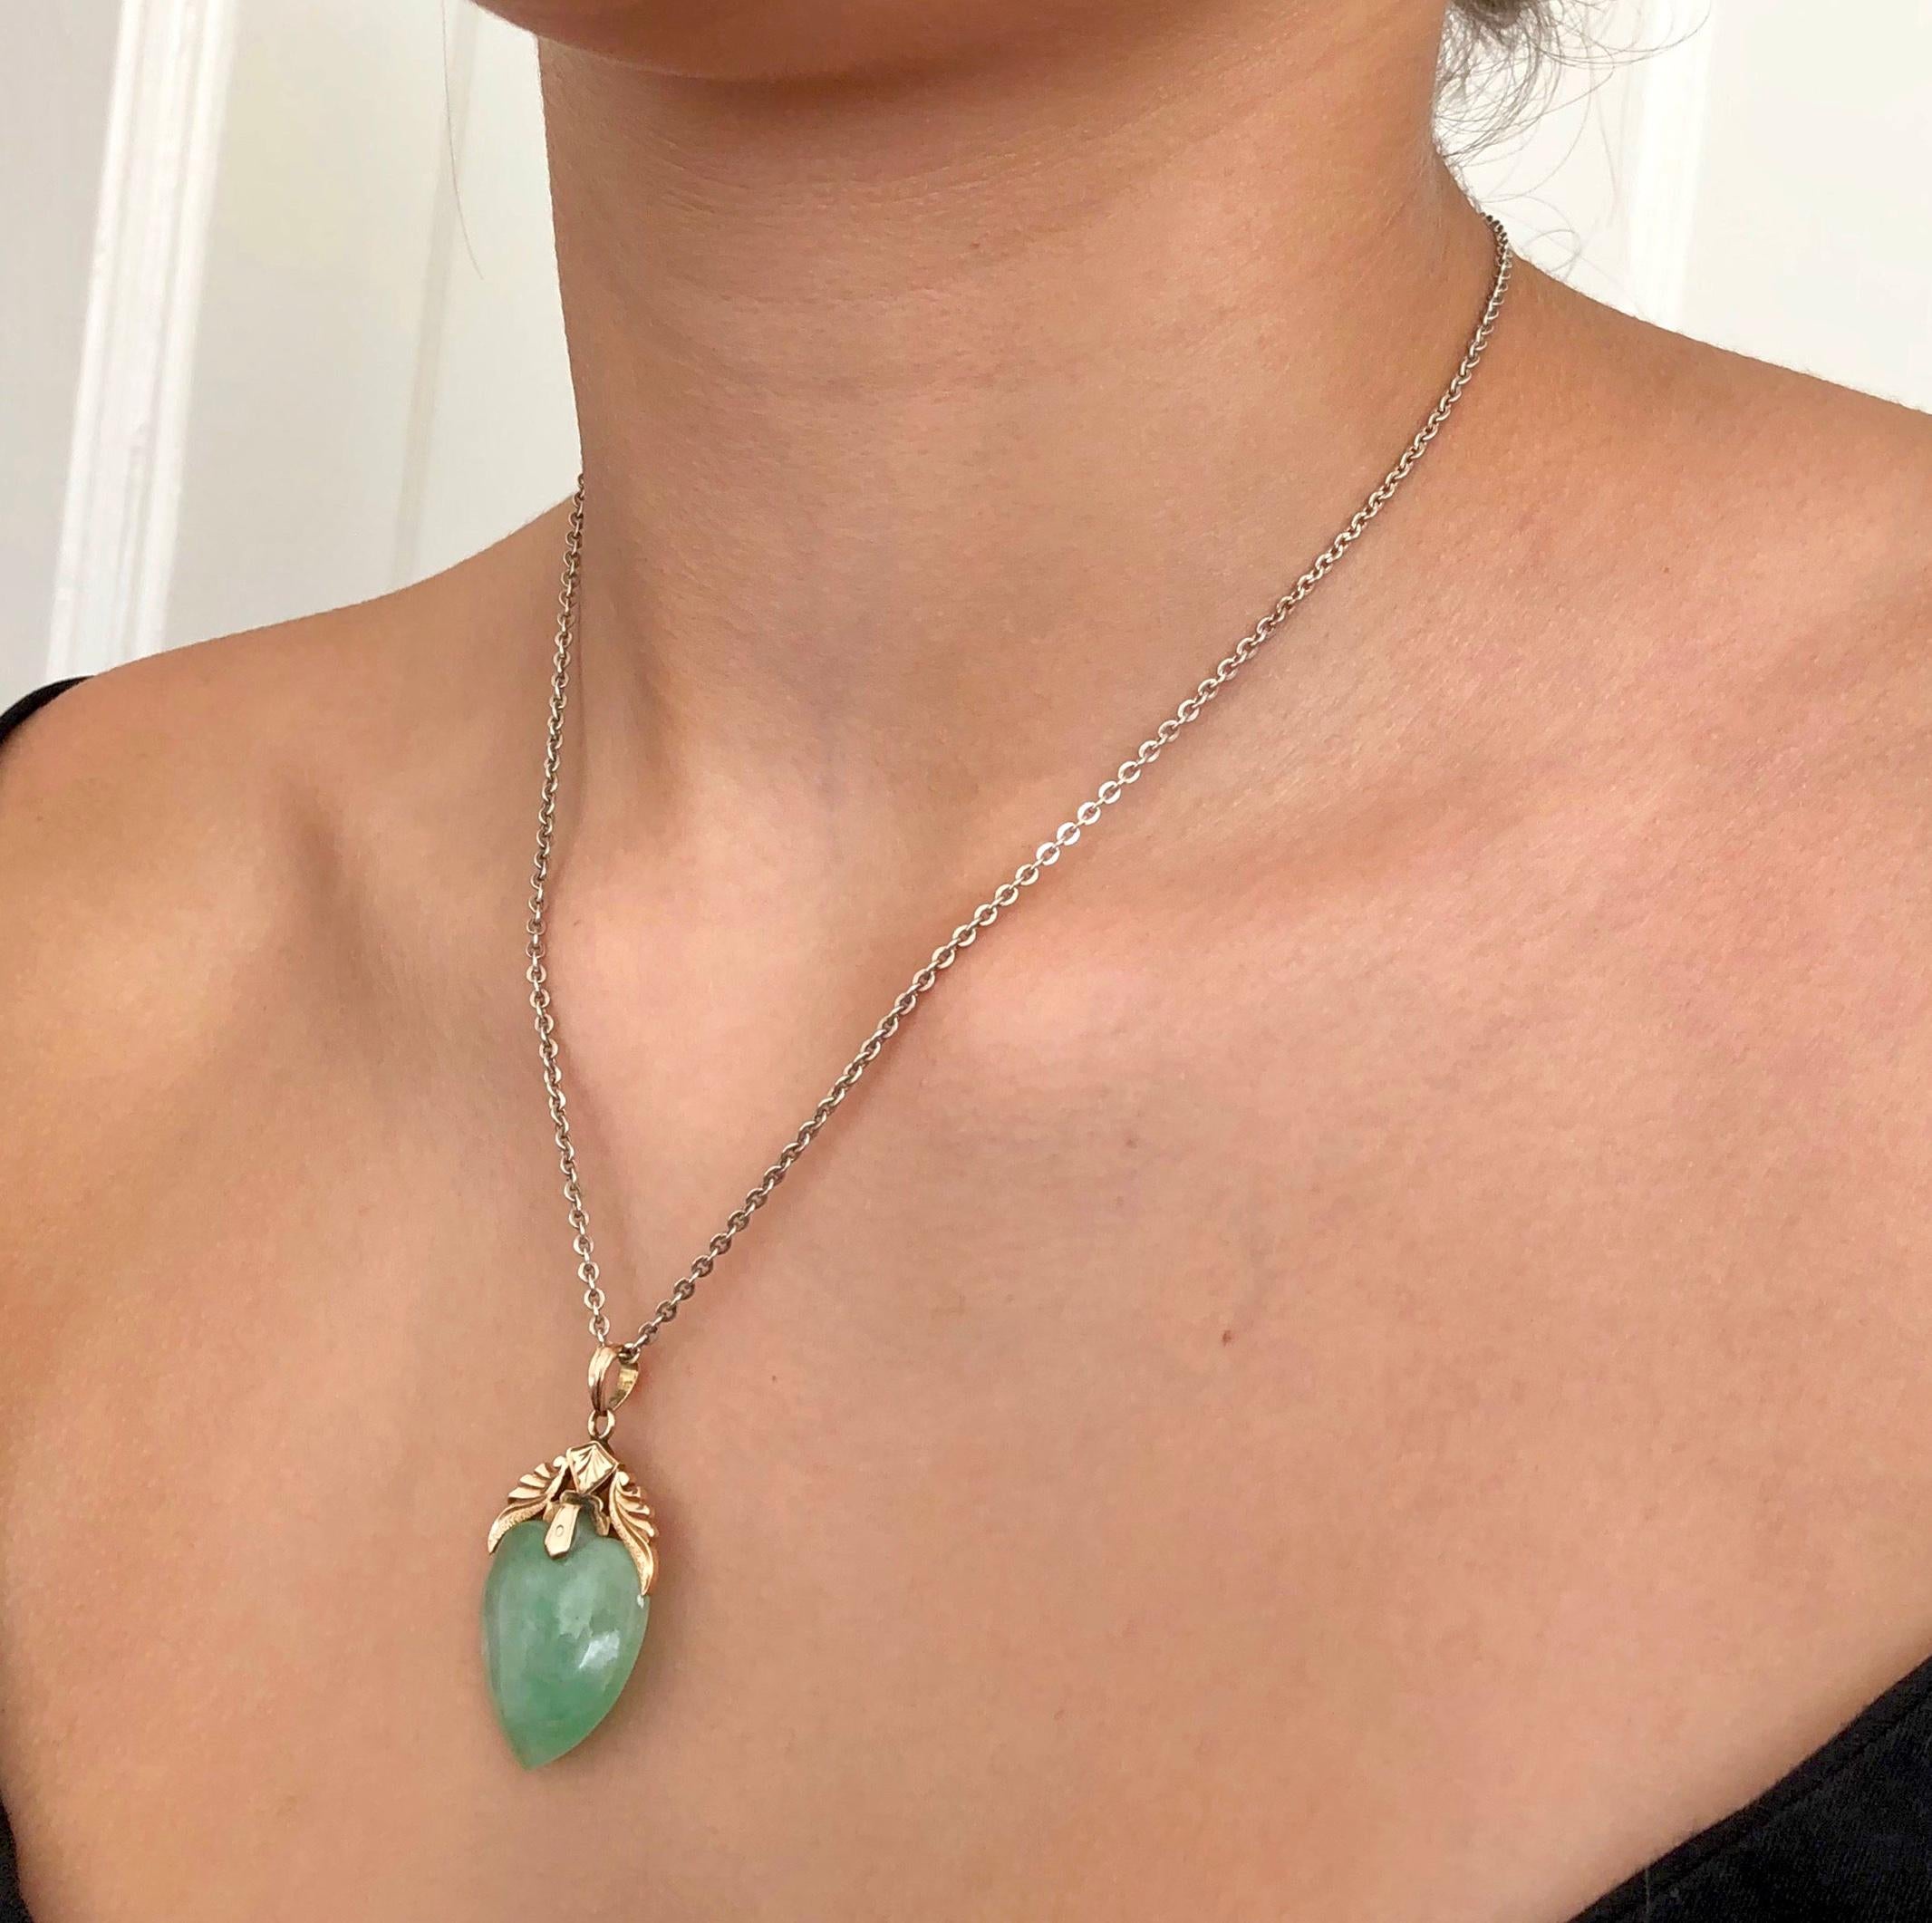 Beautiful 9 karat gold vintage heart shape jade love pendant. The heart-shaped jade is very silky and looks stunning on a necklace. This pendant featuring engraved details with very fine motifs. This love pendant would be a lovely gift for her.

Fun